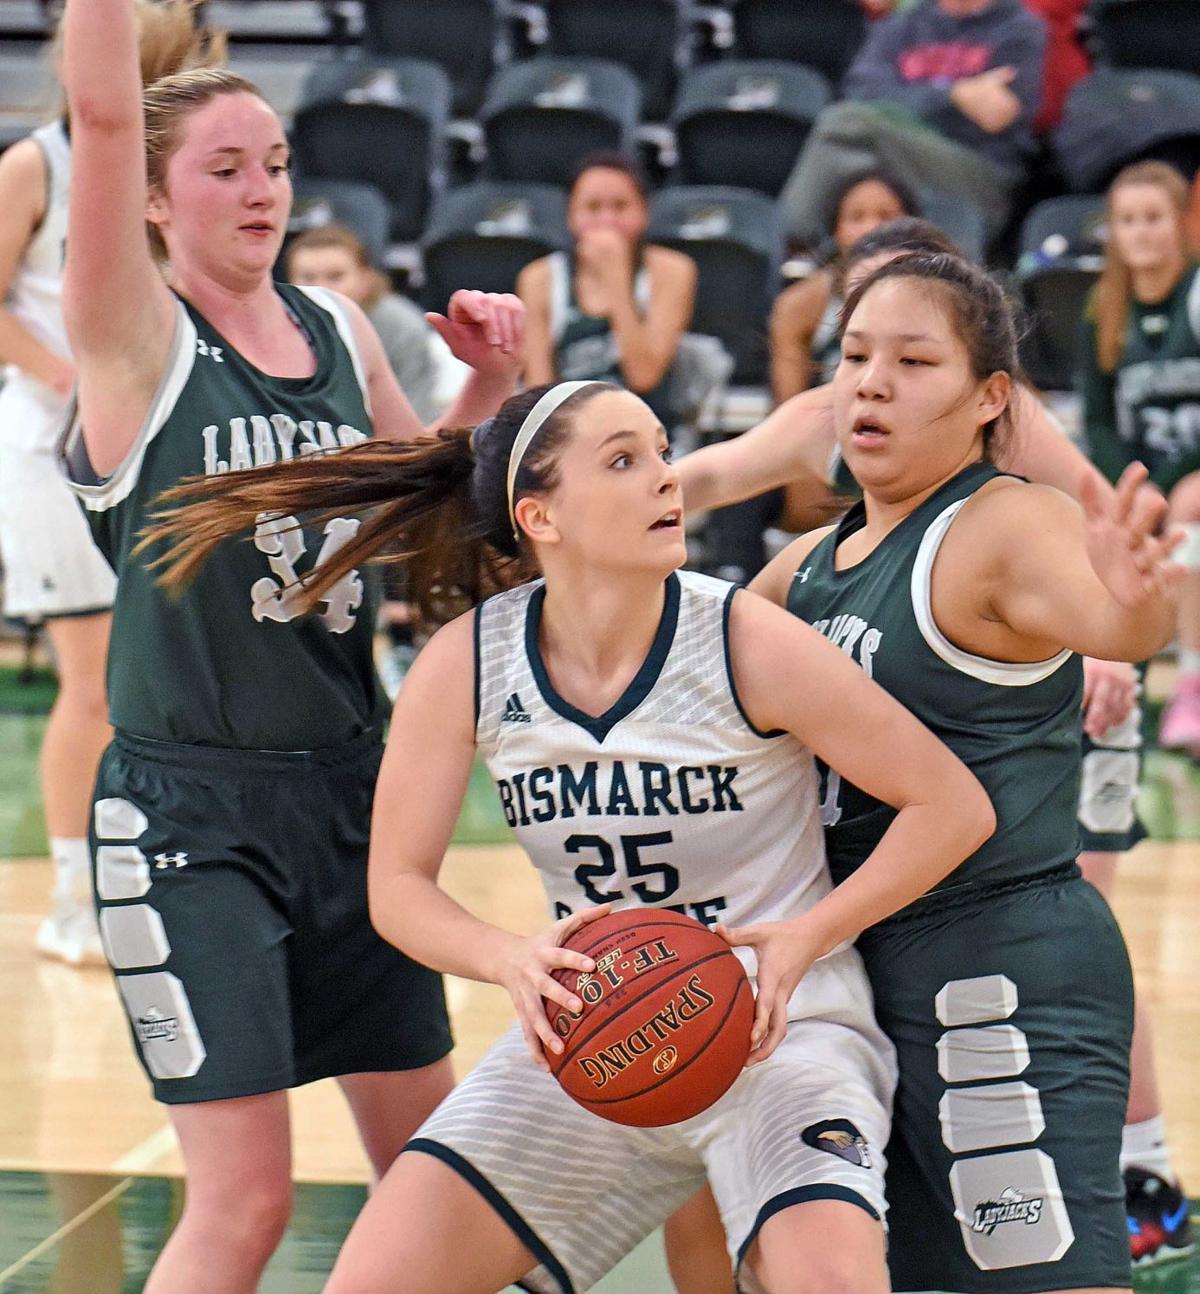 DCB's Lauren Gangl and Trinity Goggles playing defense Monday night.  Photo courtesy of the Bismarck Tribune.